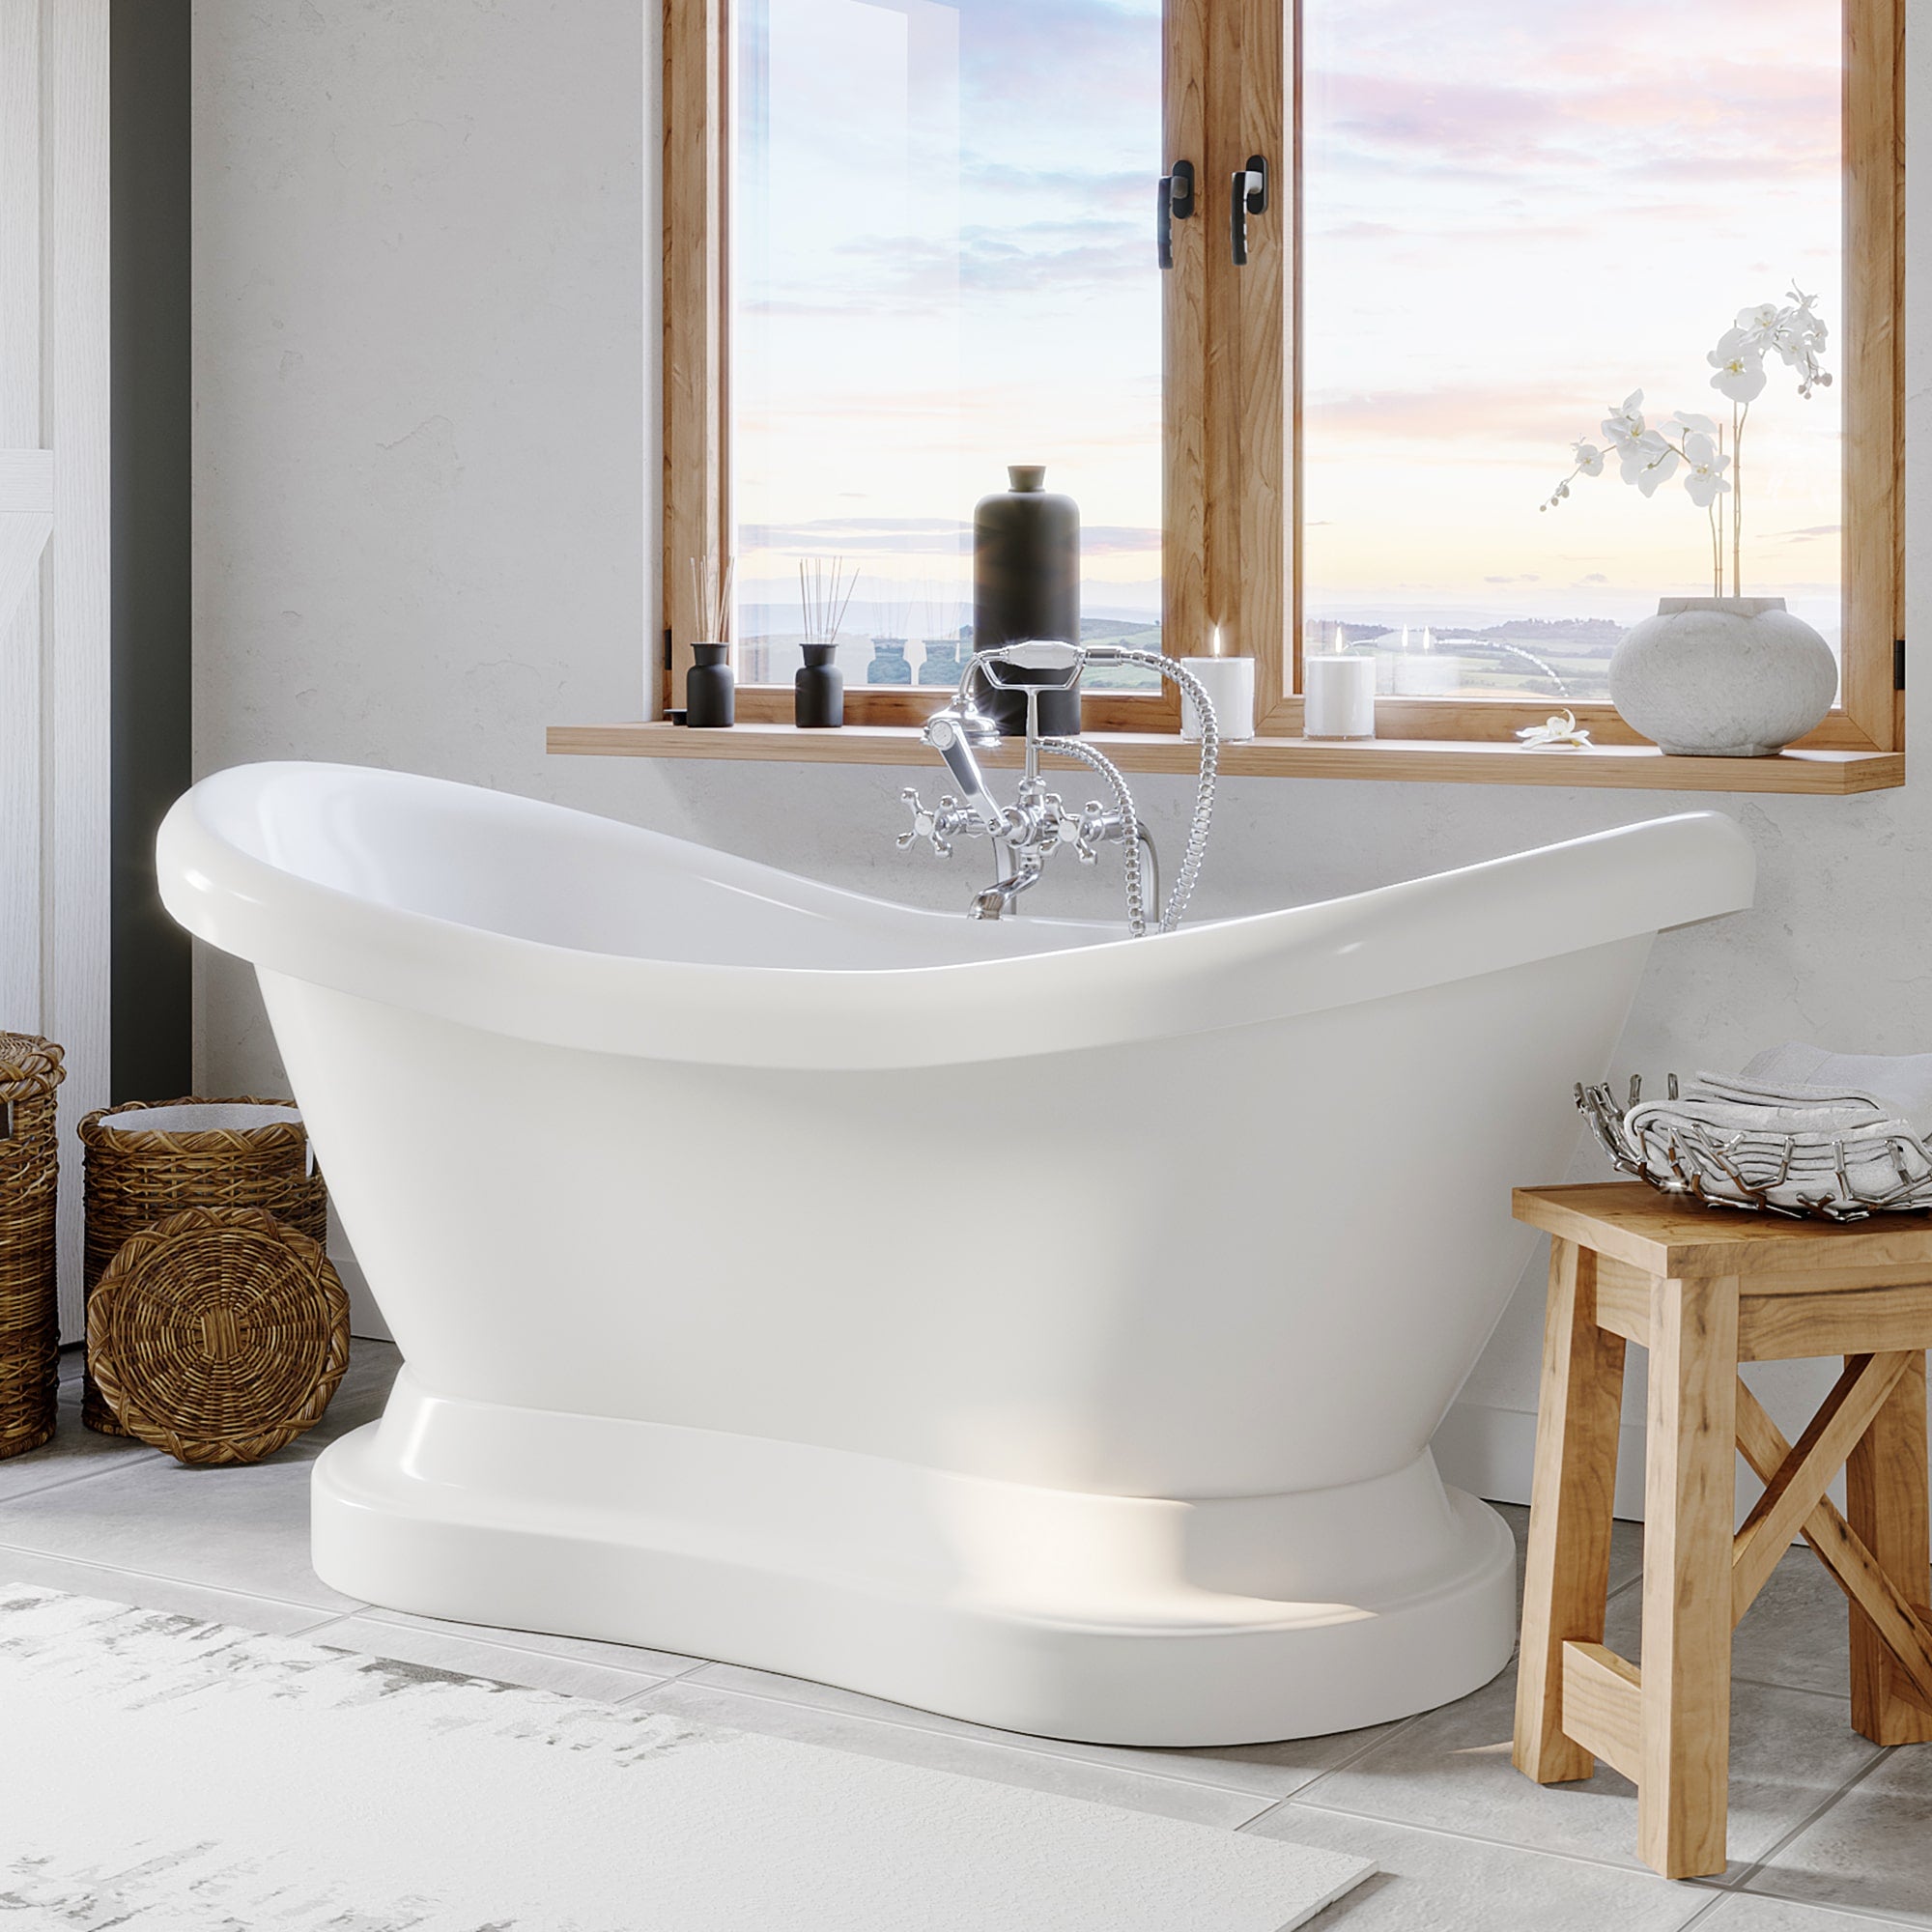 Cambridge Plumbing Double Slipper Acrylic Pedestal Soaking Tub (Fiberglass Core & White Gloss Finish) and Complete Plumbing Package - Brushed nickel tub filler ADES-PED-398463-PKG-NH - Vital Hydrotherapy